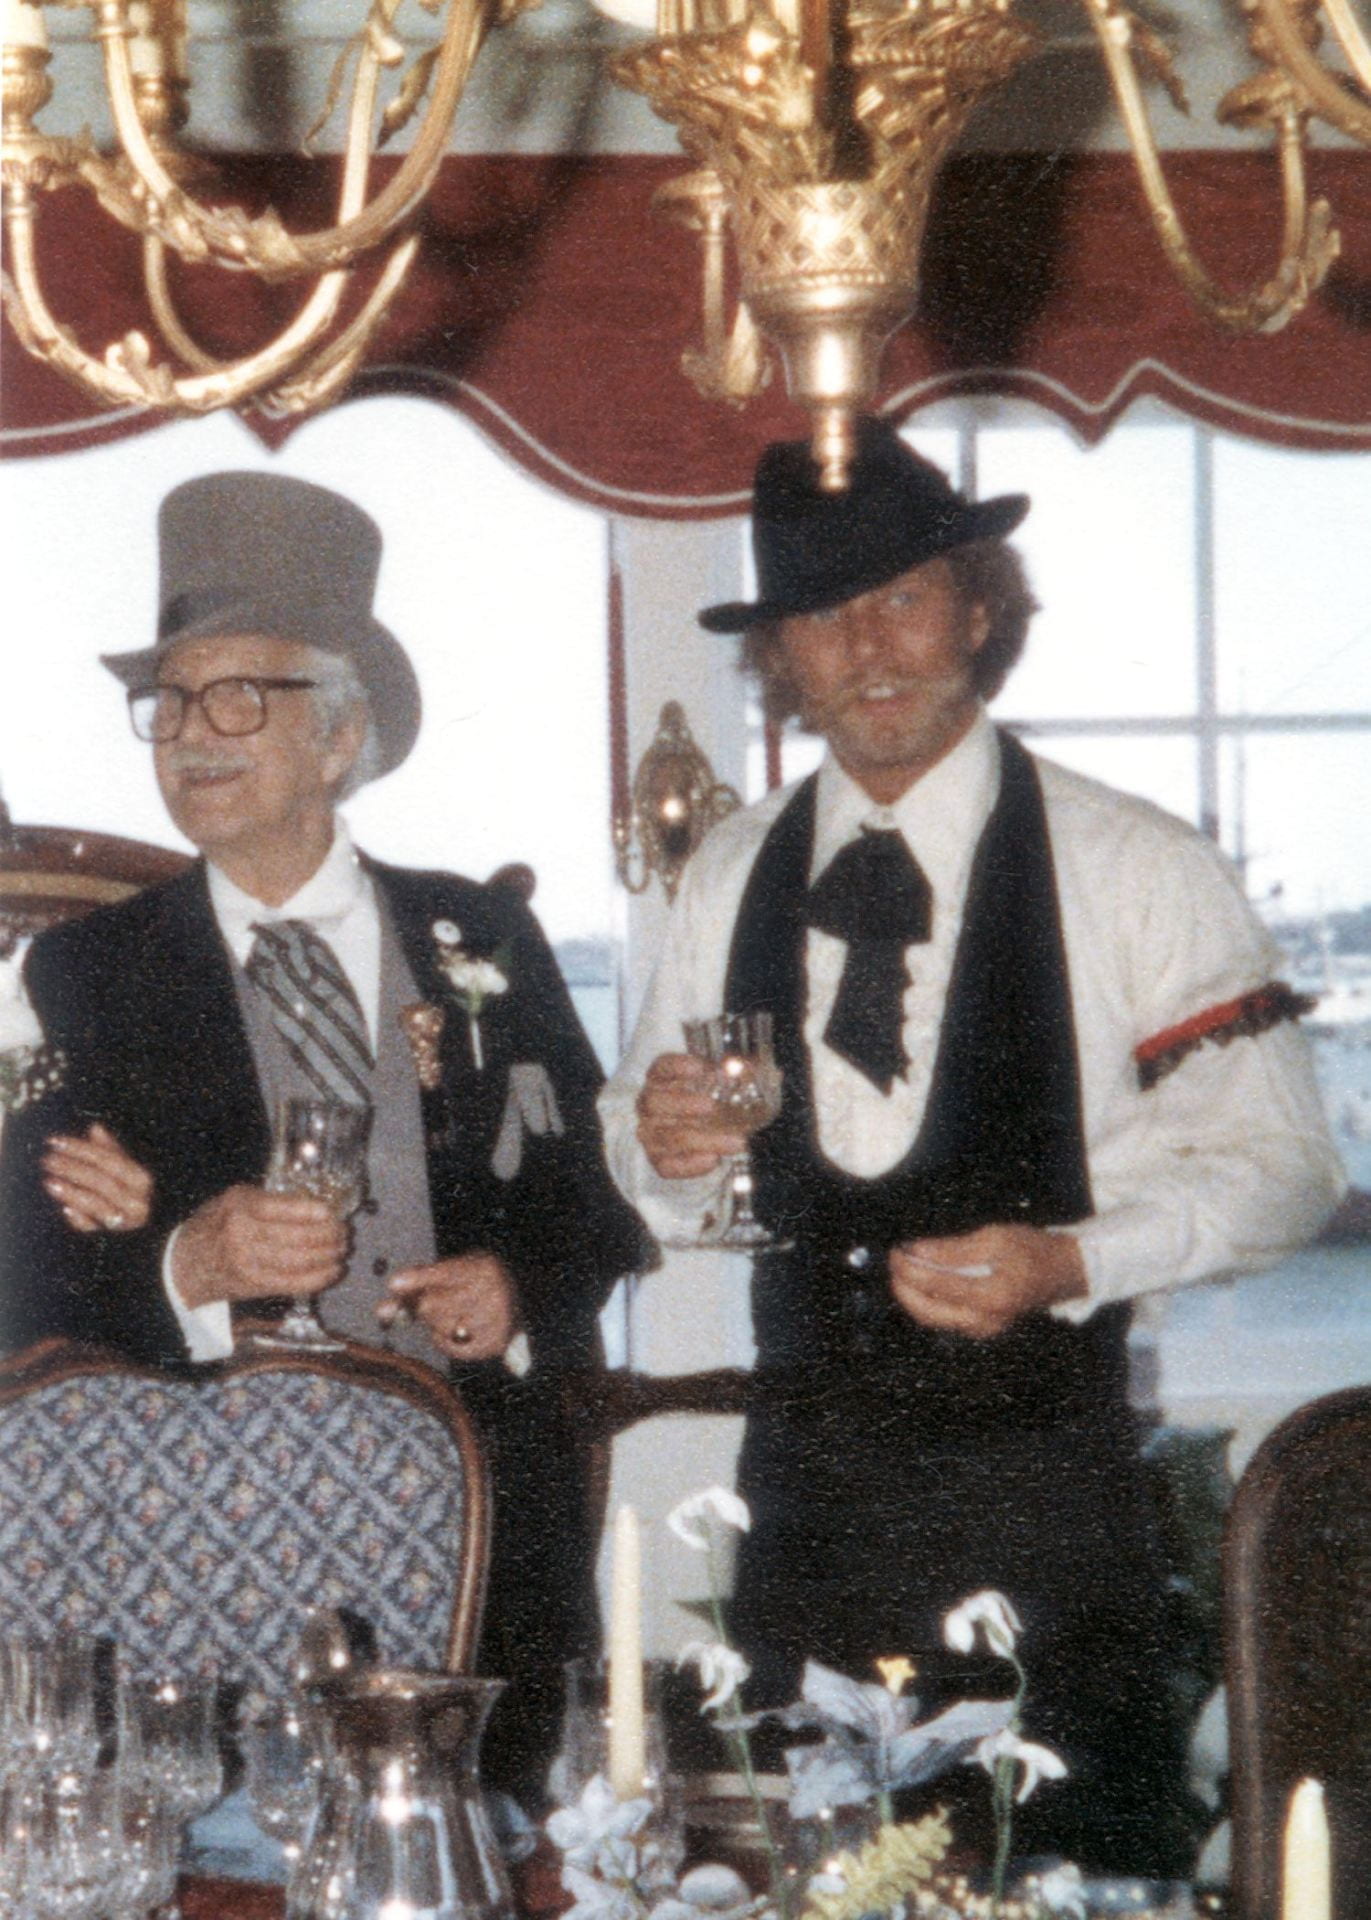 Magician Richard Turner (right) with Dai Vernon (left), one of the most well-known 20th century magicians and Turner's card mentor, in 1982. Credit: Richard Turner